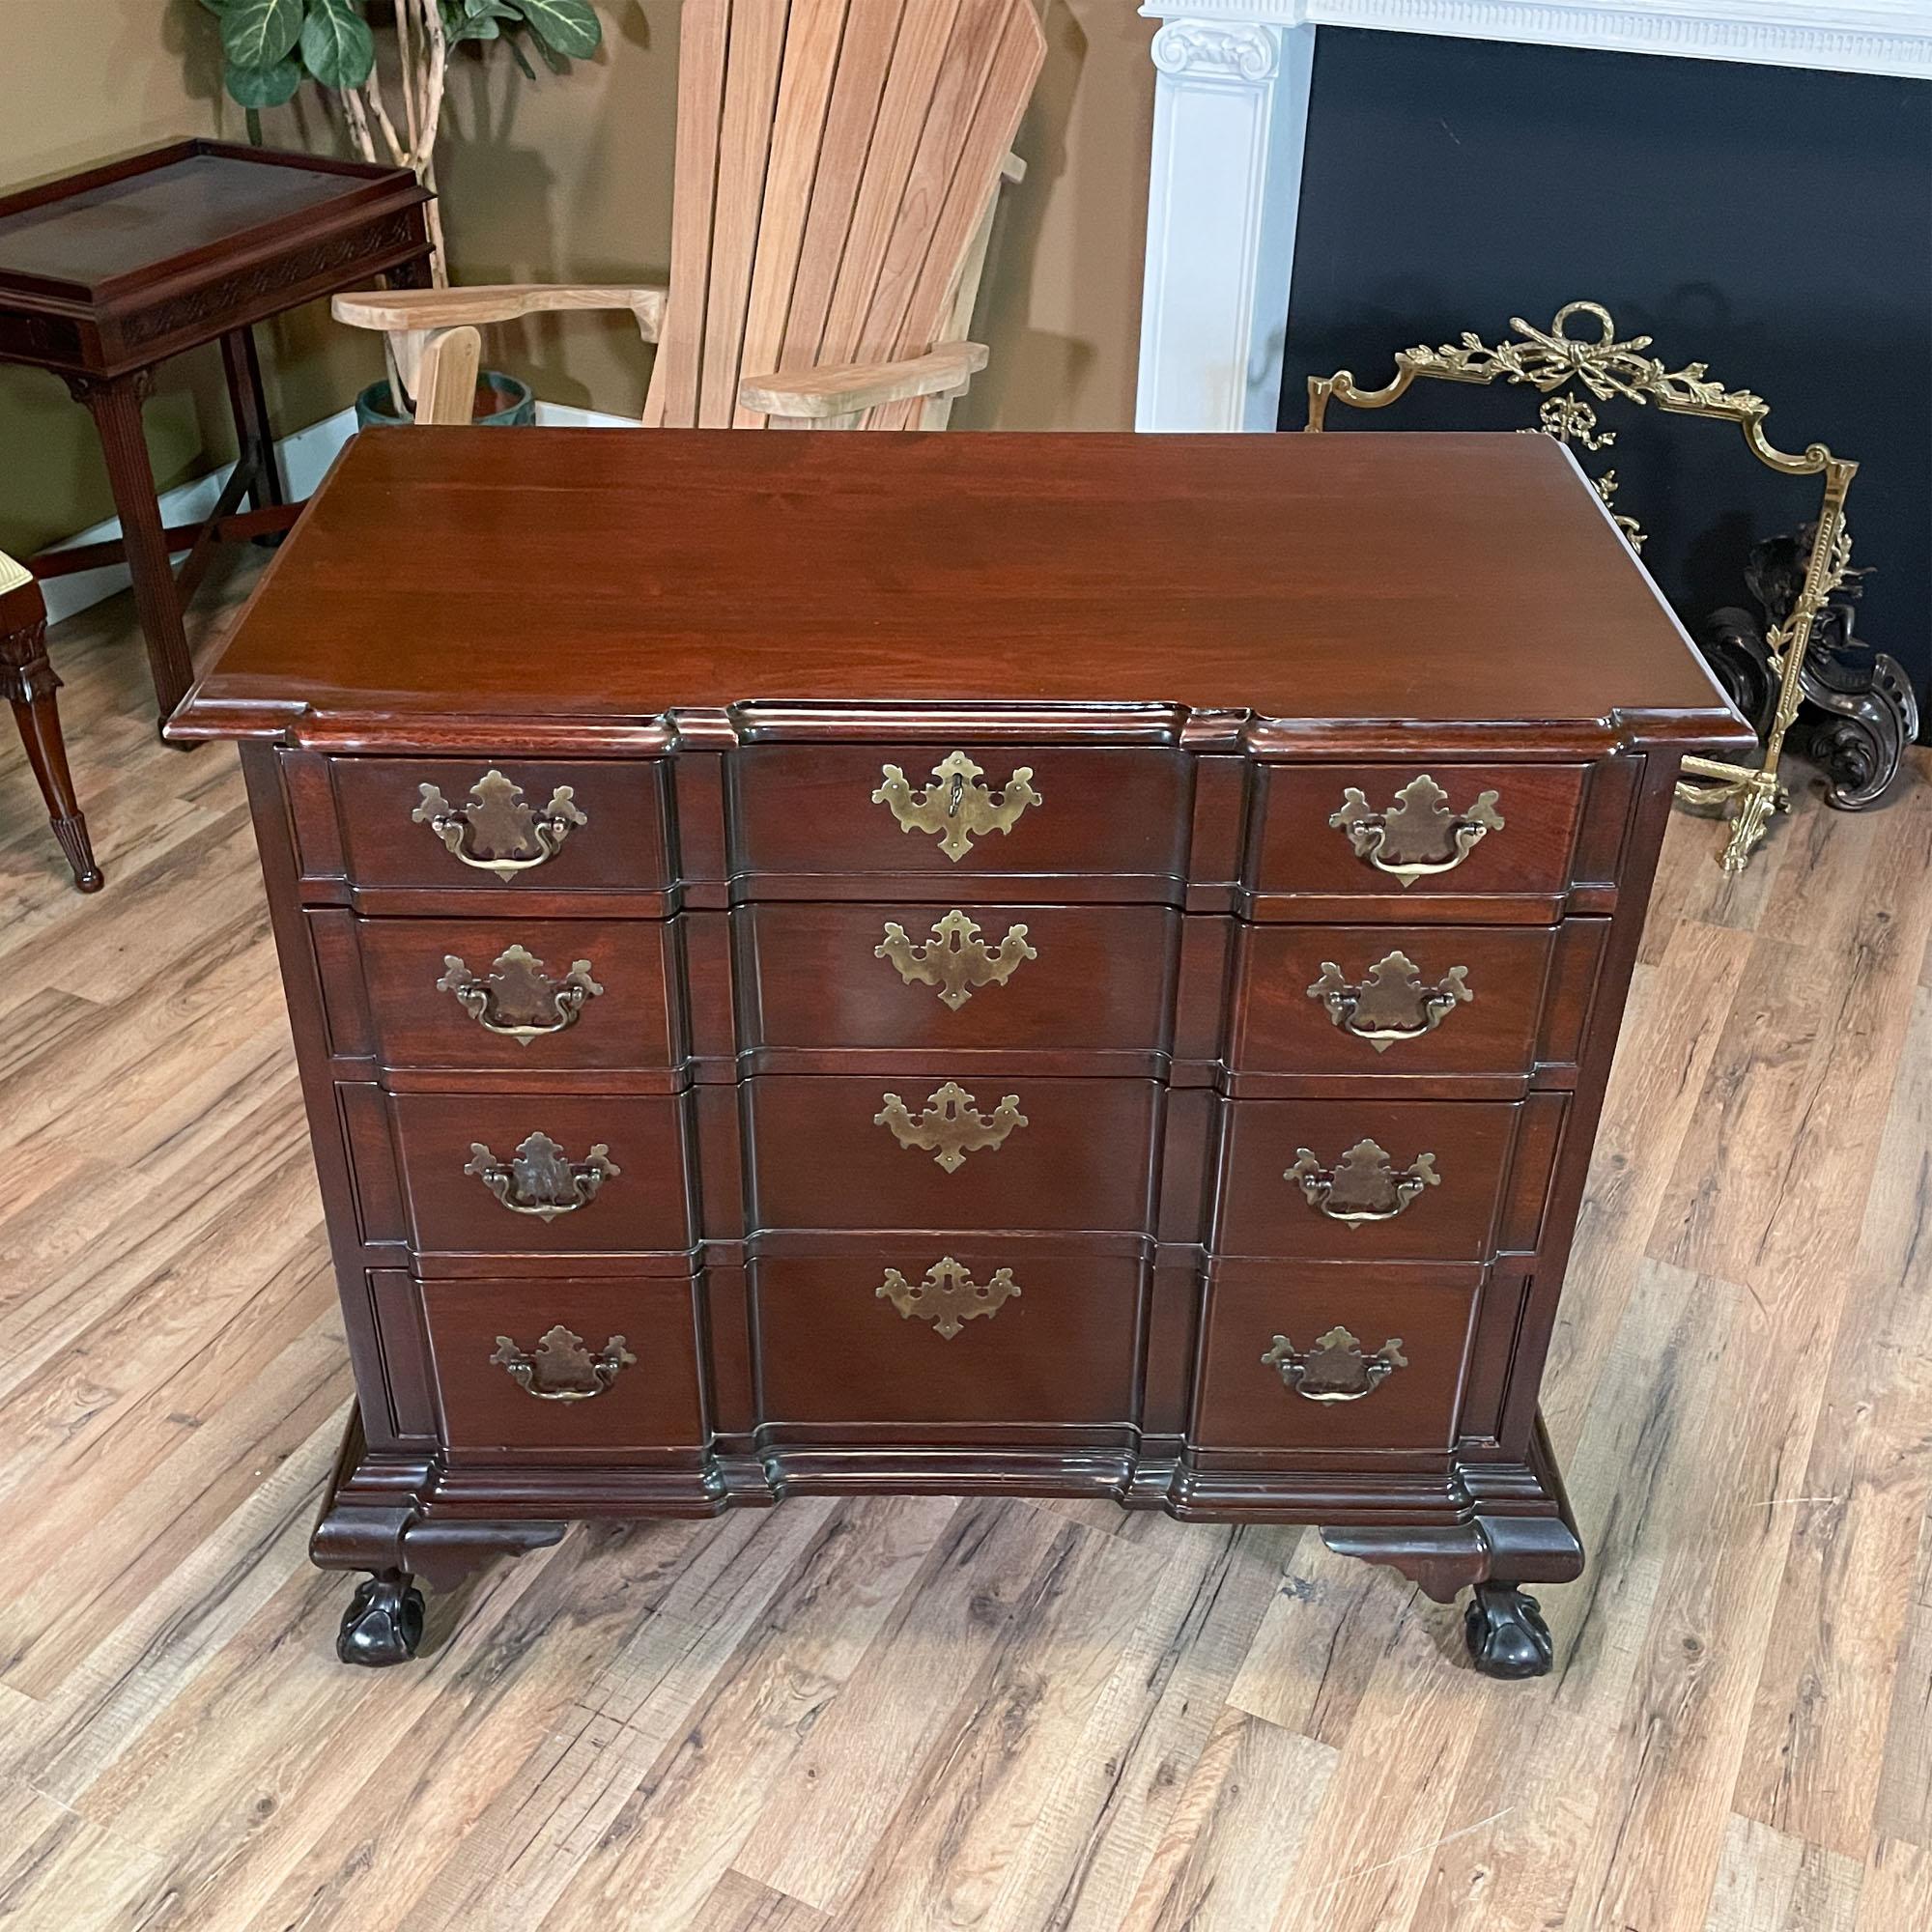 A vintage Mahogany Ball and Claw Blockfront Chest of Drawers brought to you by Niagara Furniture. A classic furniture style this blockfront shaped chest features four drawers which are each beautifully shaped and carved to  work together creating a